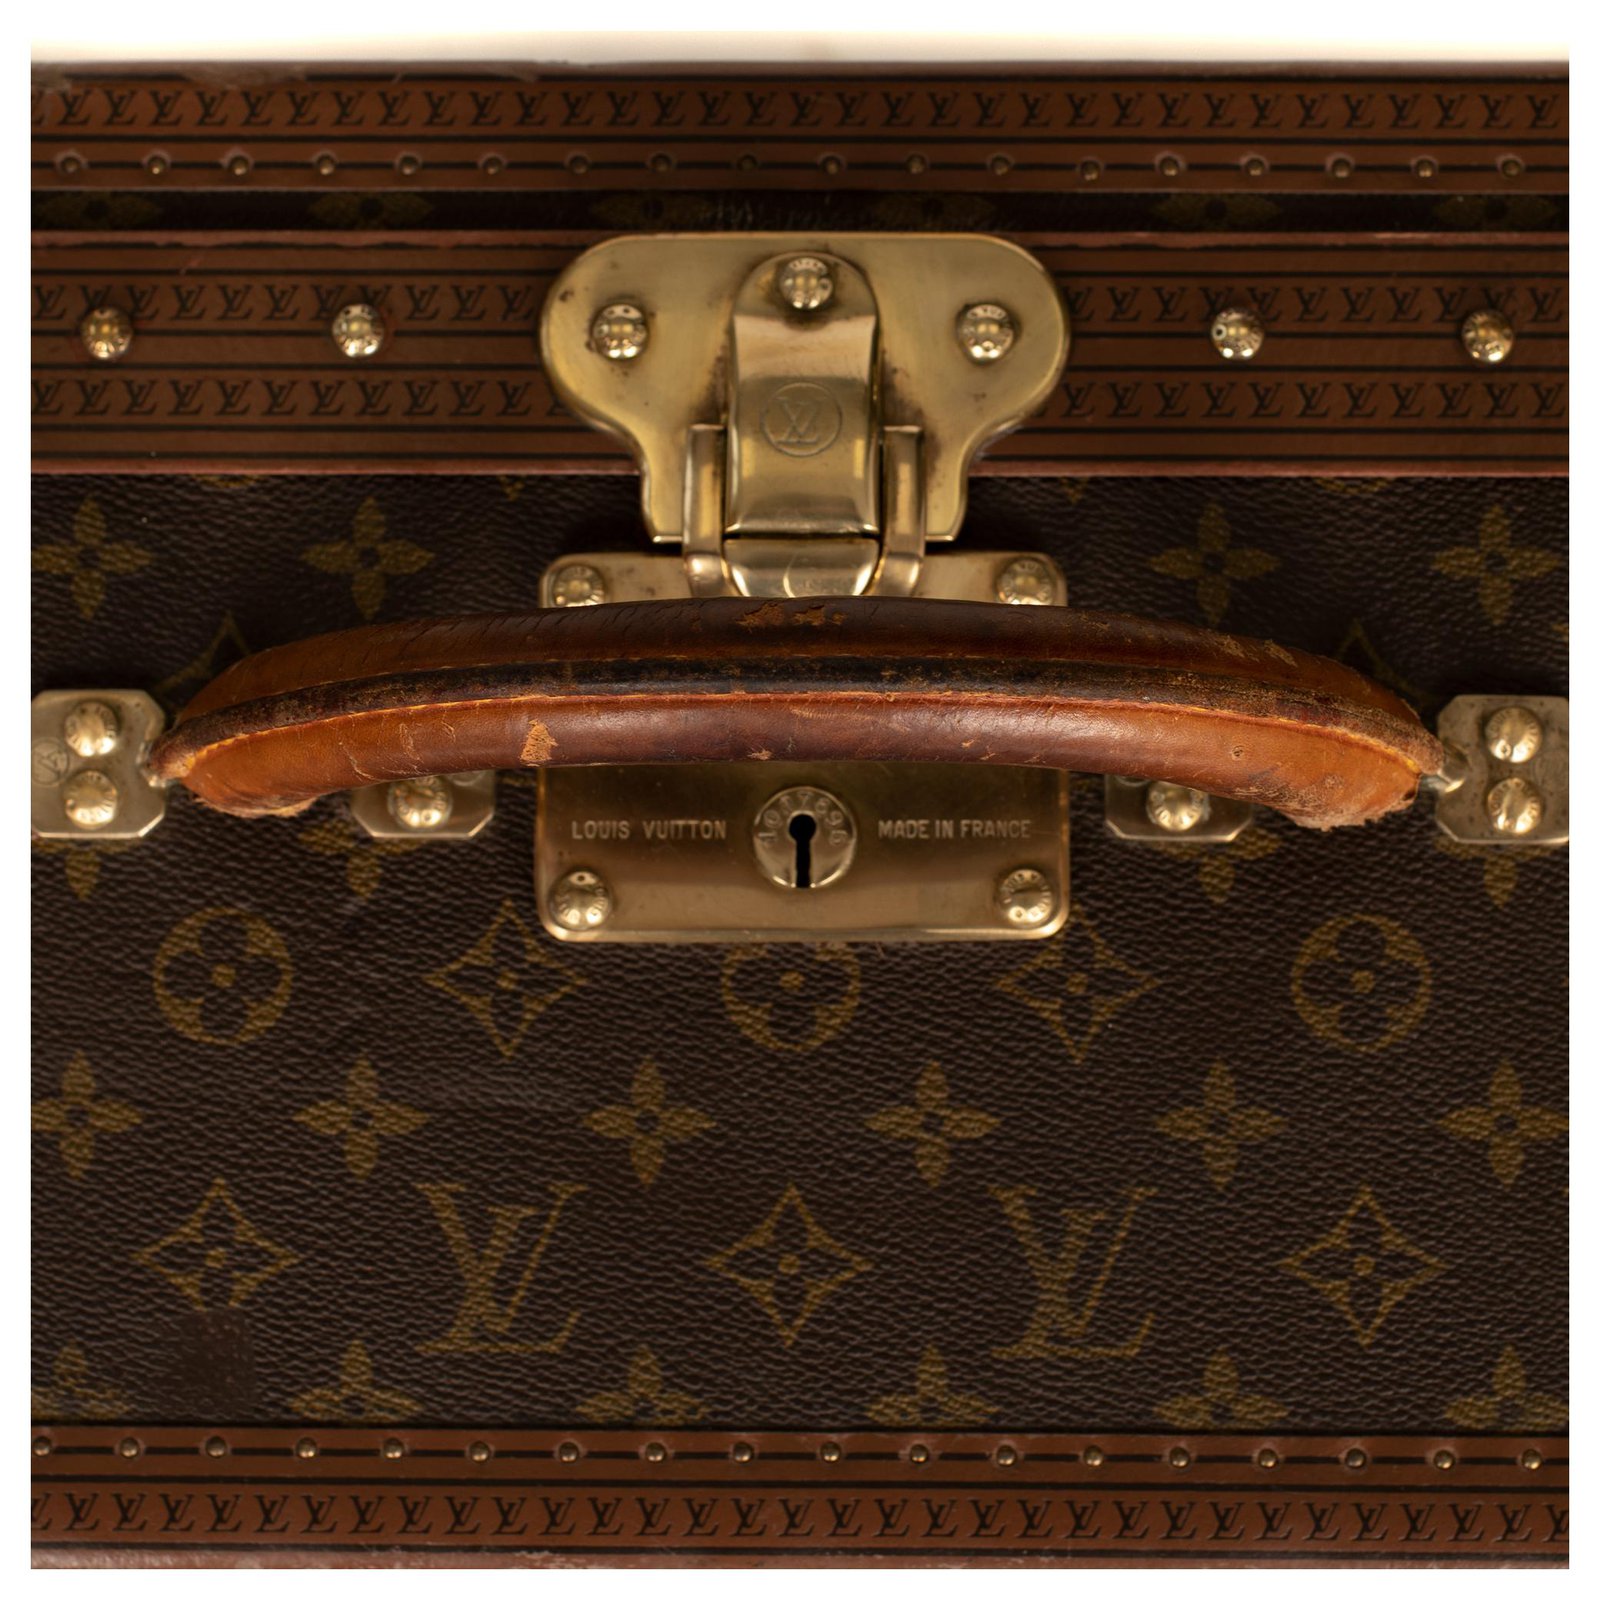 LOUIS VUITTON, Alzer 65, suitcase, classic LV pattern in monogram canvas,  handle, details and address tag in leather and brass-shod corners, label  marked LOUIS VUITTON, gold-plated details. Vintage clothing & Accessories 